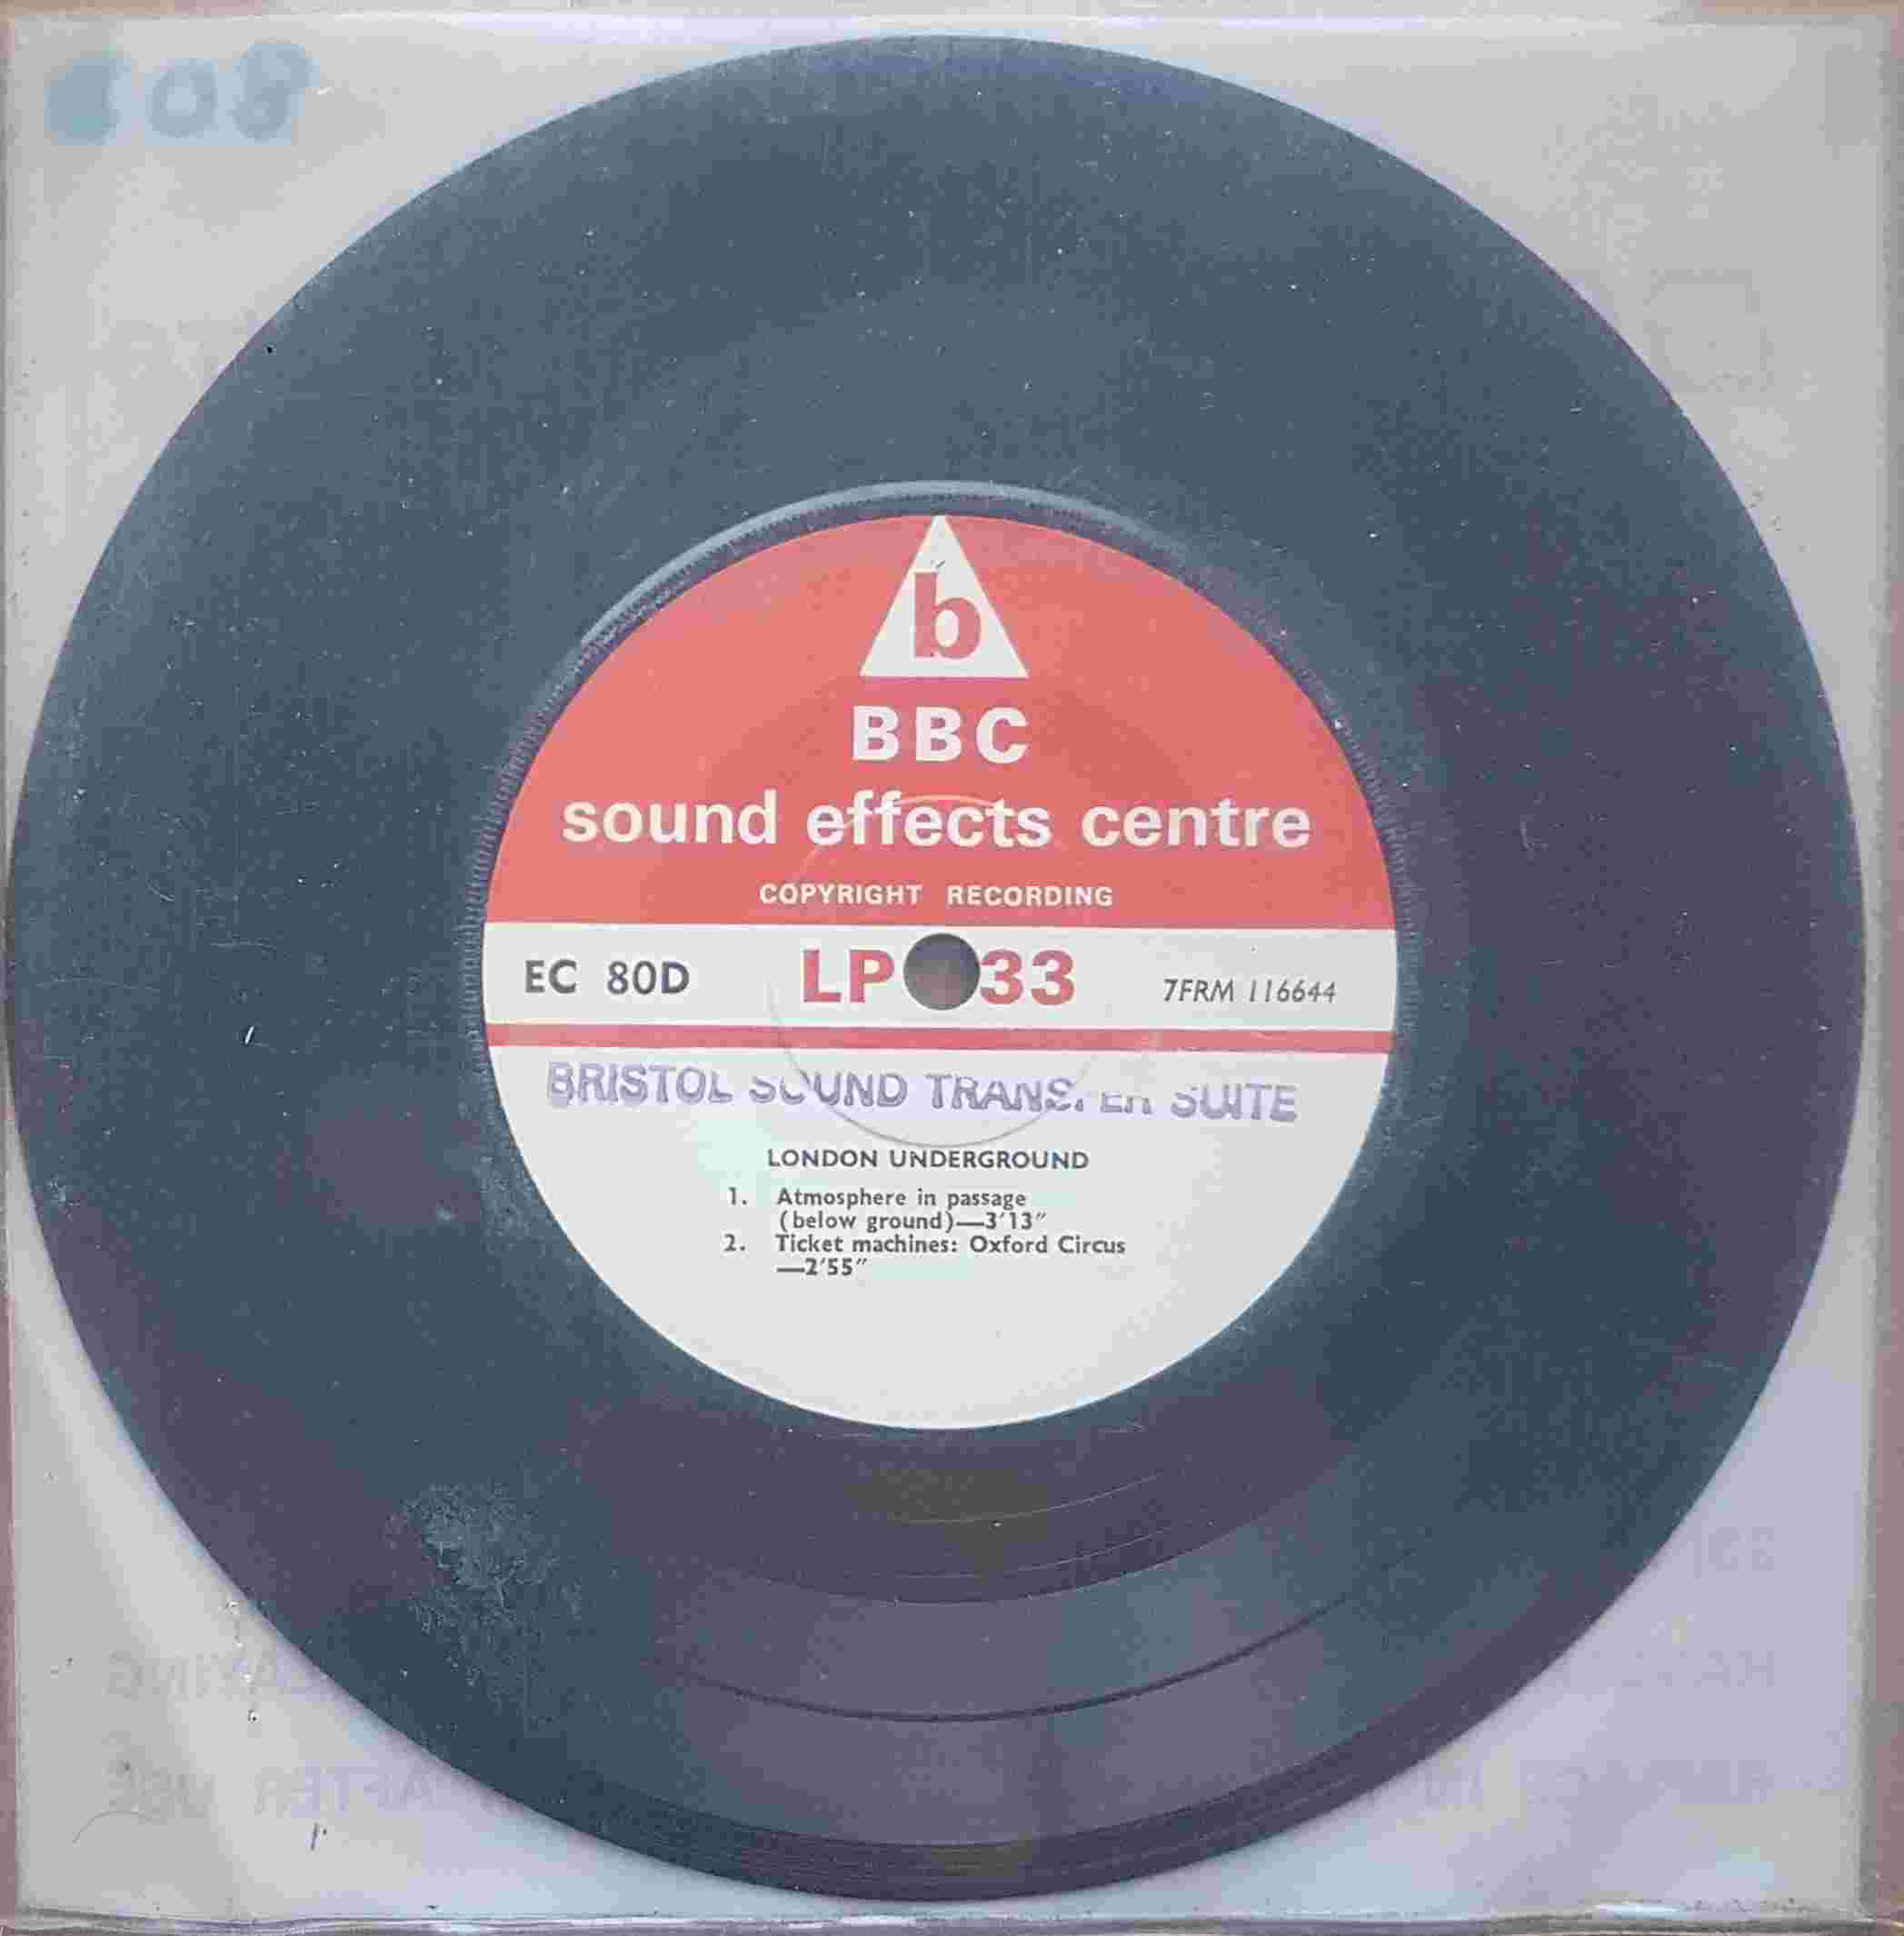 Picture of EC 80D London Underground by artist Not registered from the BBC records and Tapes library